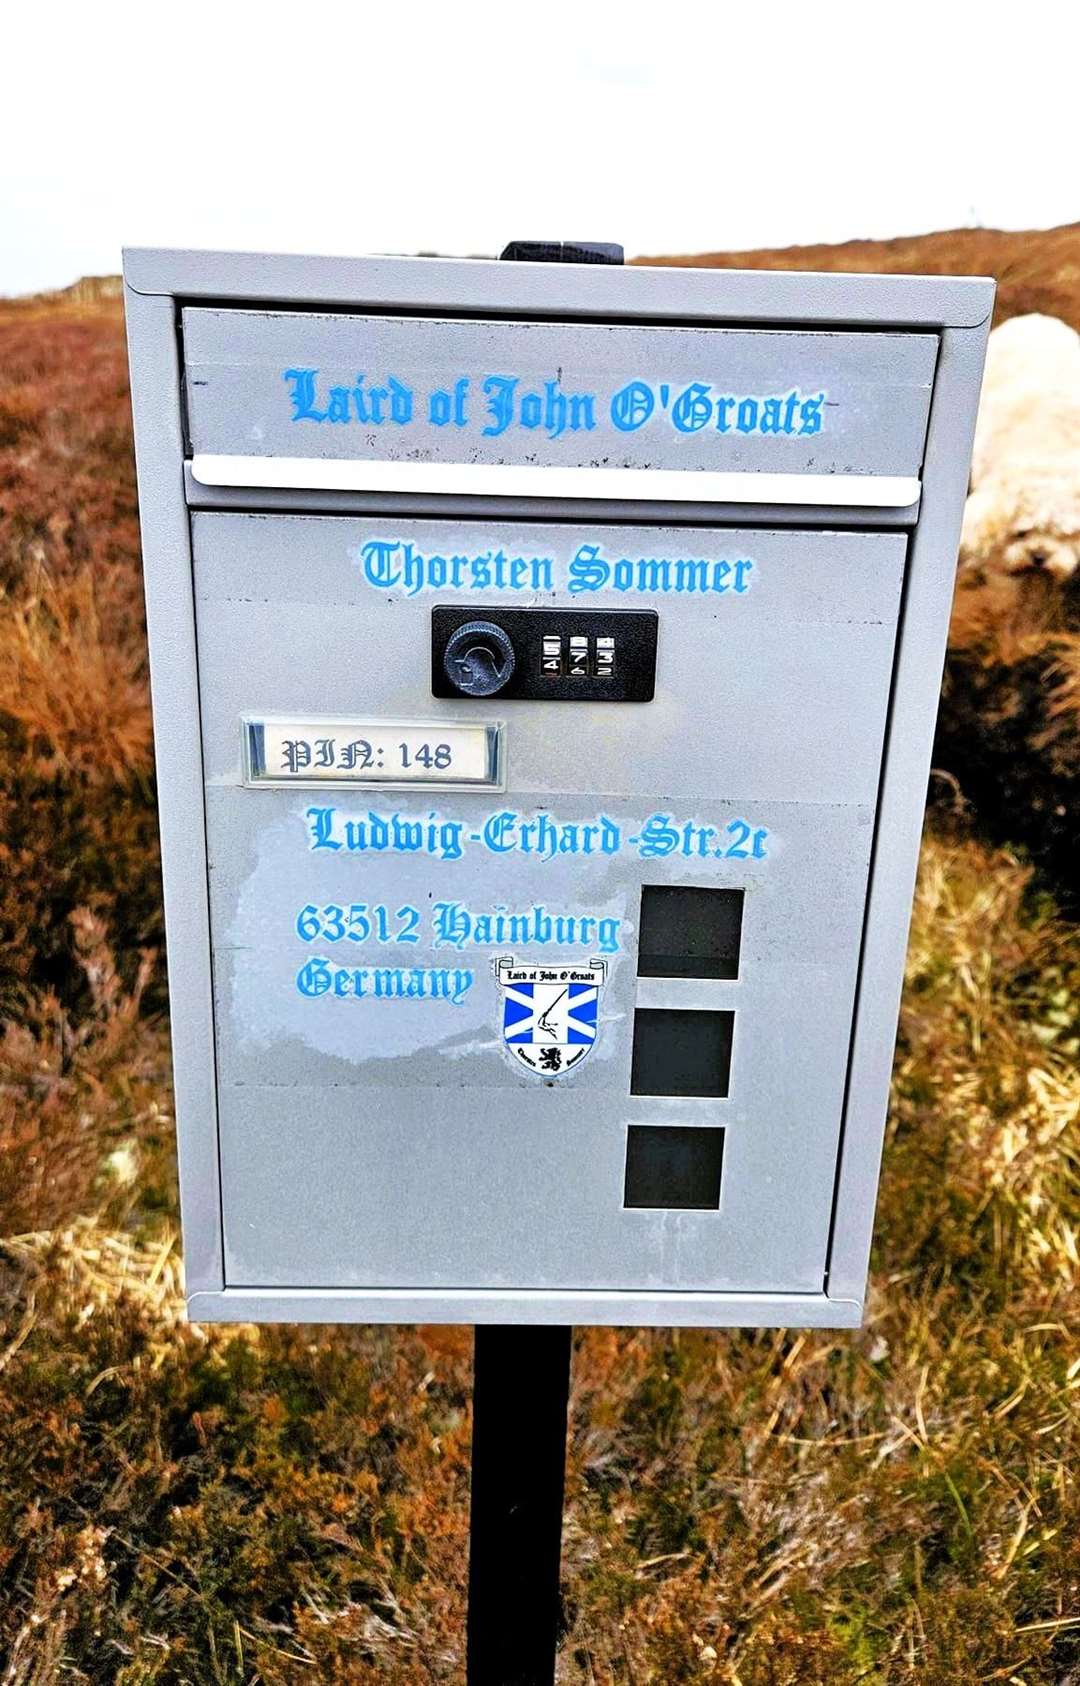 The postbox sits in moorland with no apparent house close by and has the title 'Laird of John O'Groats' on it. Picture: Chris Aitken